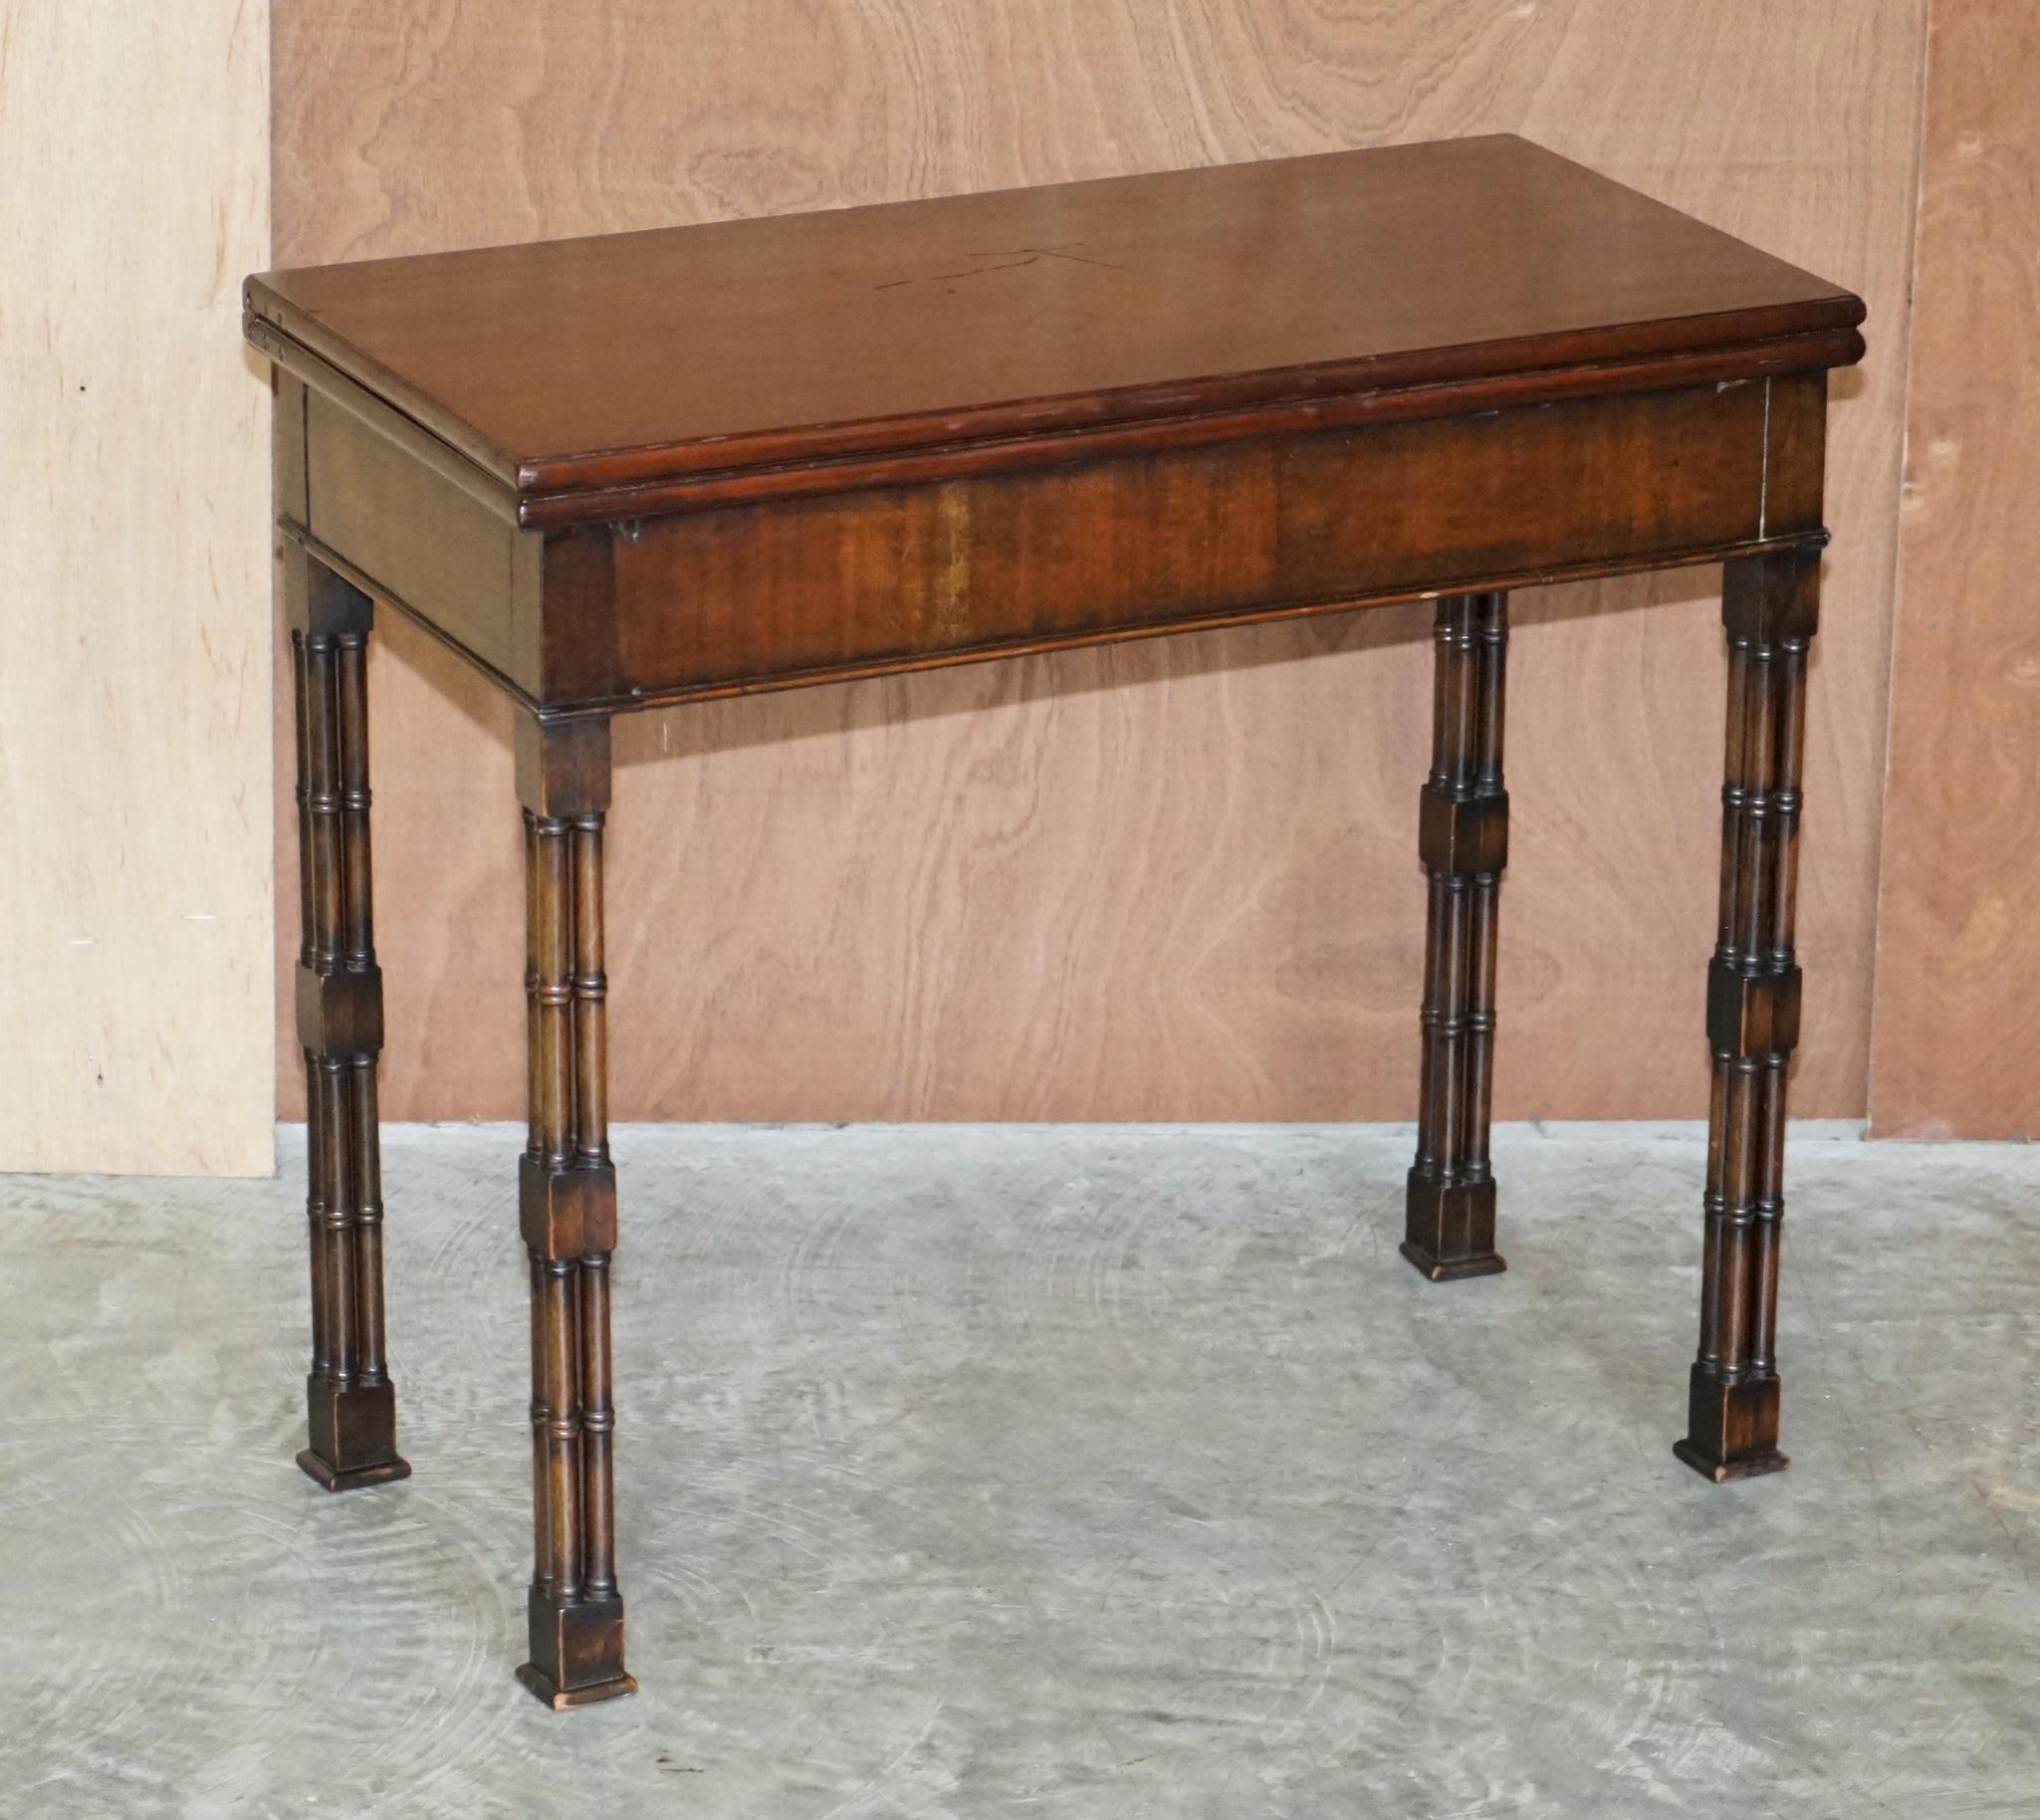 We are delighted to offer this lovely circa 1860 Victorian fold over card table with Thomas Chippendale Cluster Column legs

A good looking well made and decorative piece. It’s based on an original Thomas Chippendale console table that doubles up